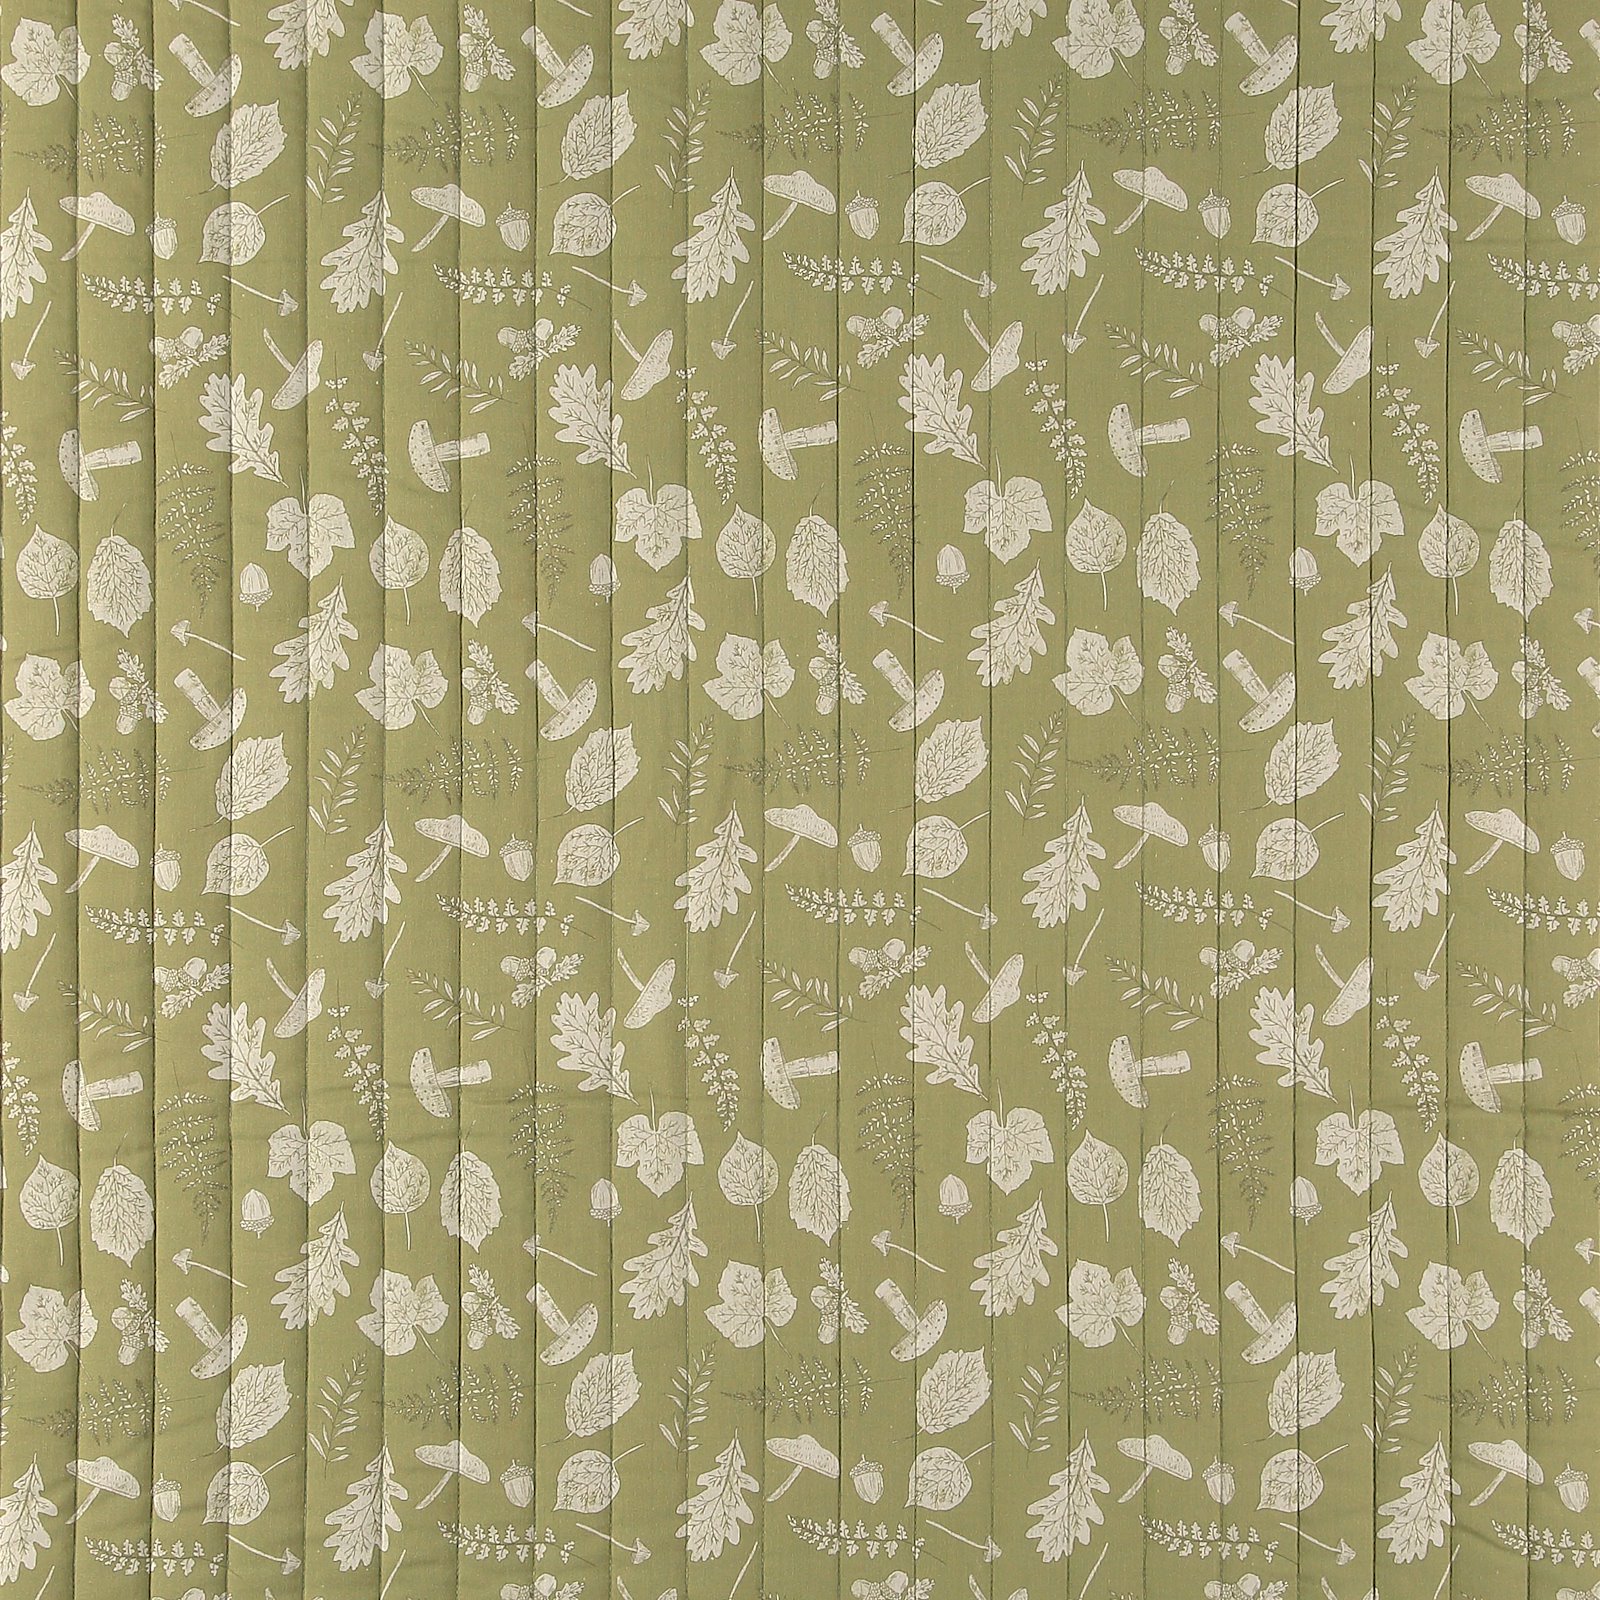 Woven quilt olive green w leafs 2-sided 920258_pack_sp